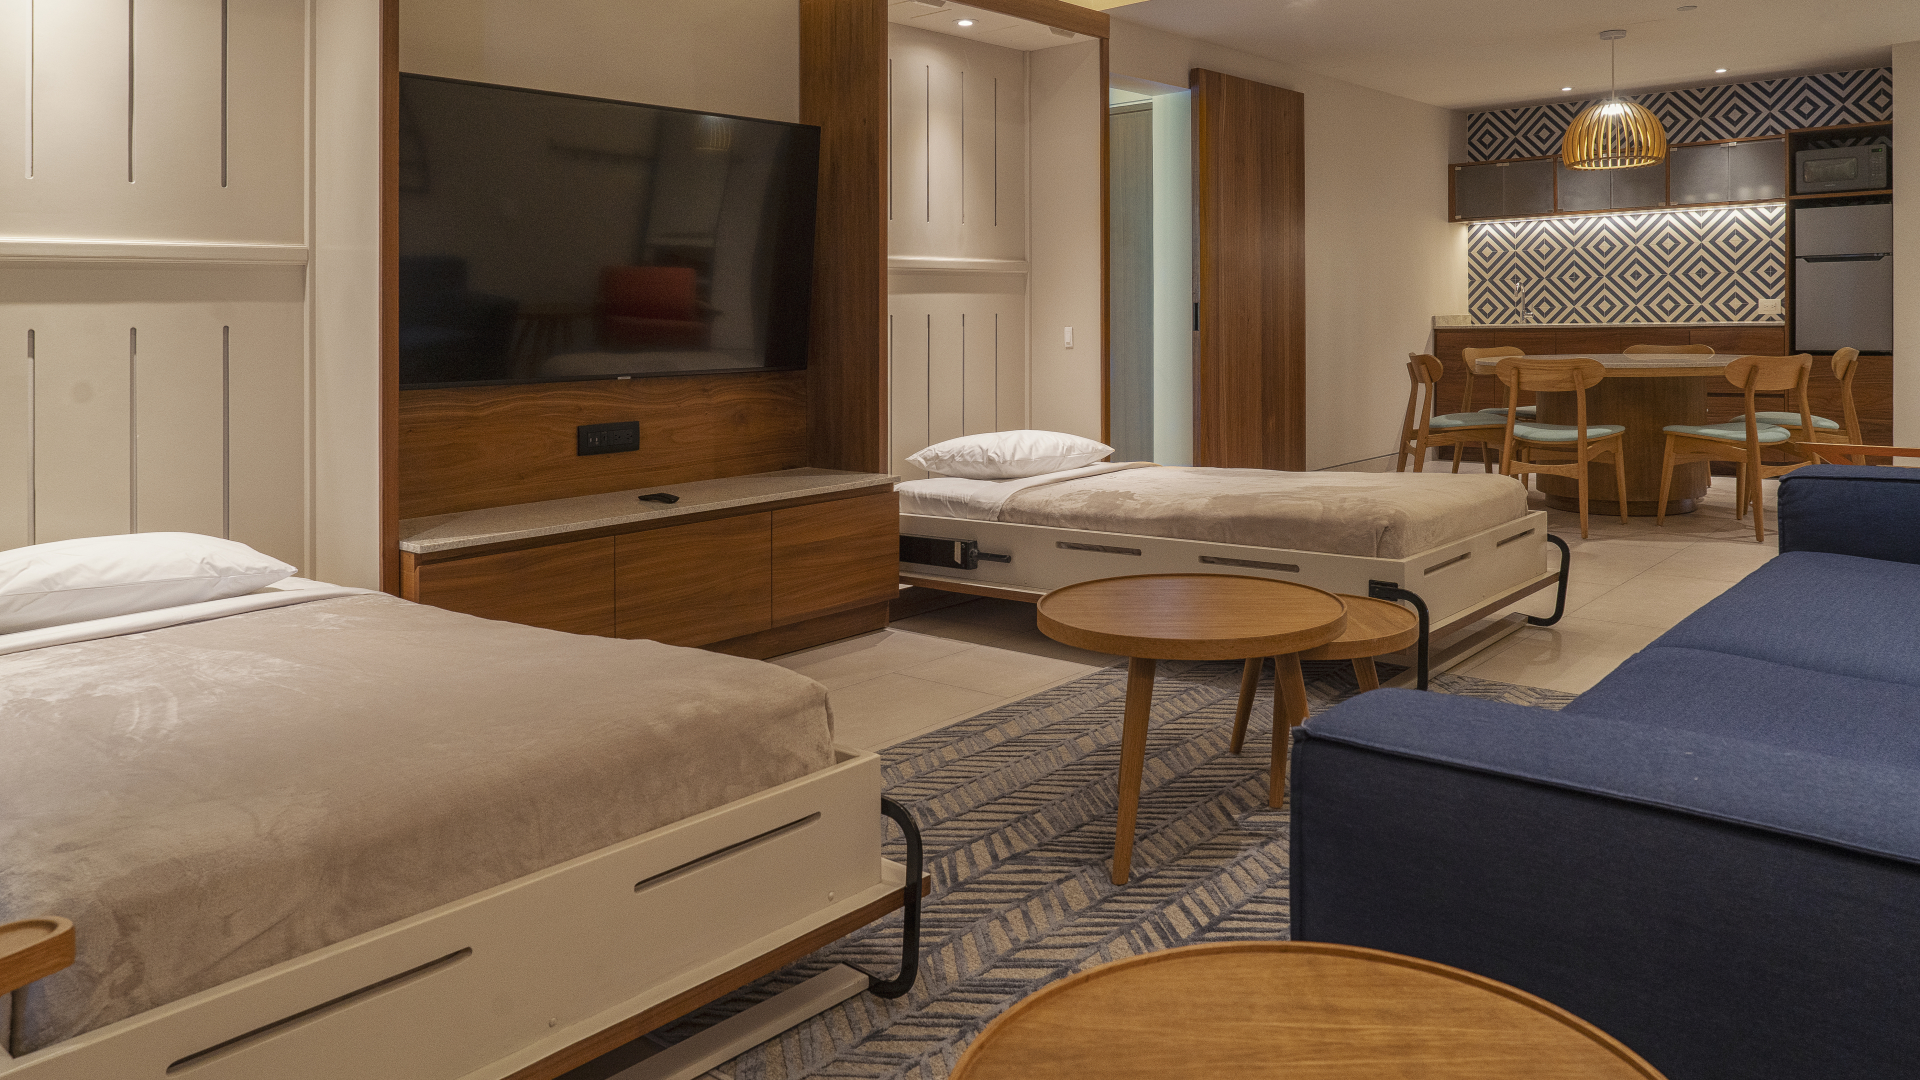 Two beds in room with comfortable seating